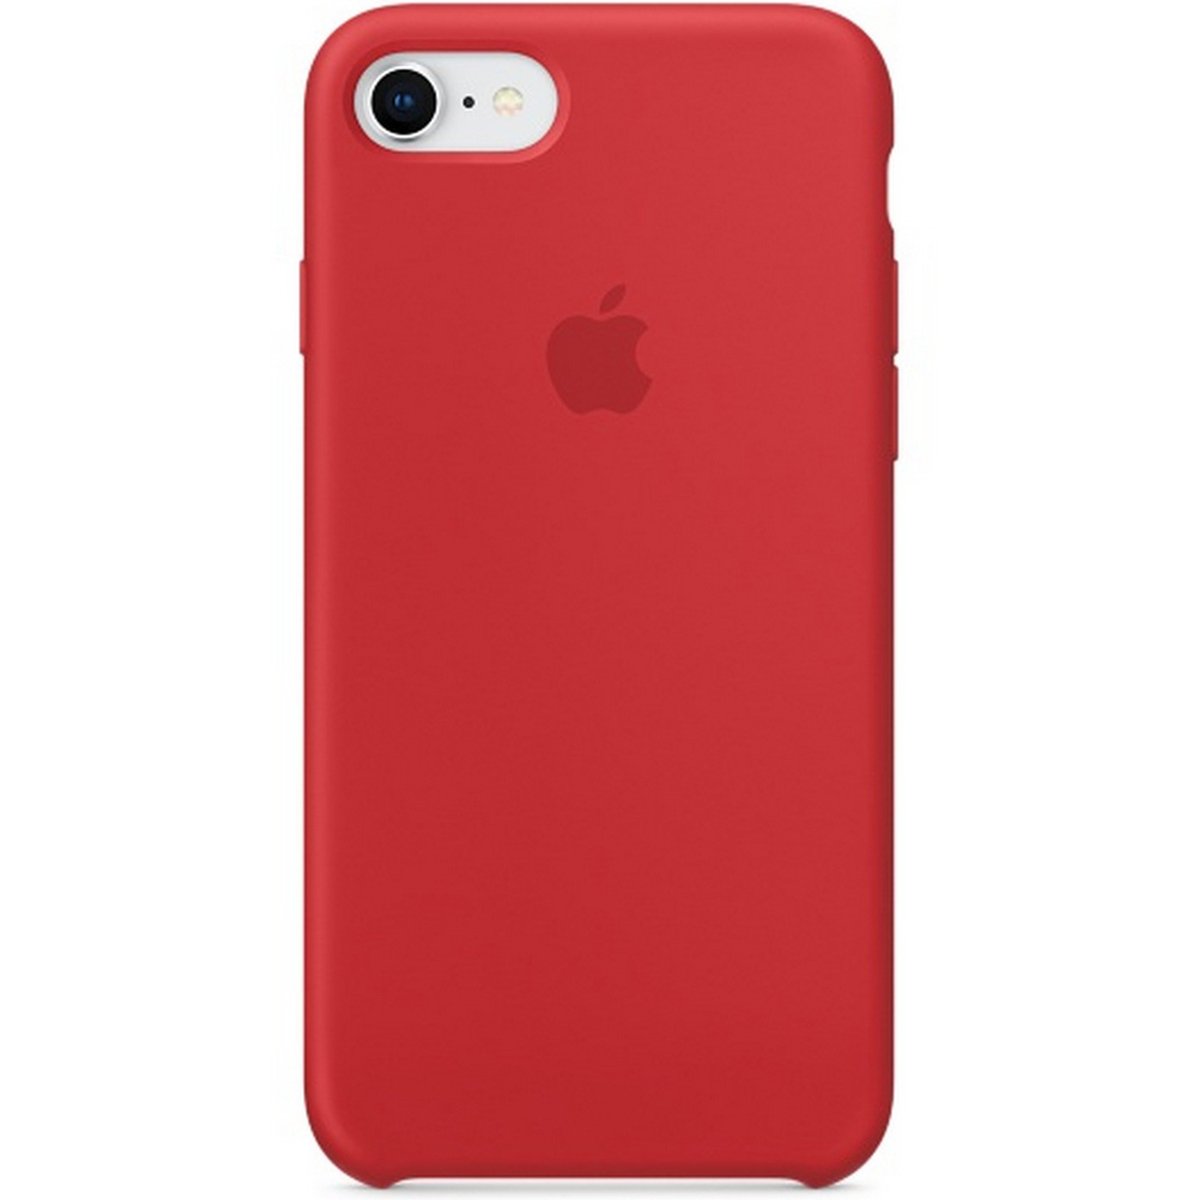 apple-iphone-8-silicone-case-red-online-at-best-price-cover-skins